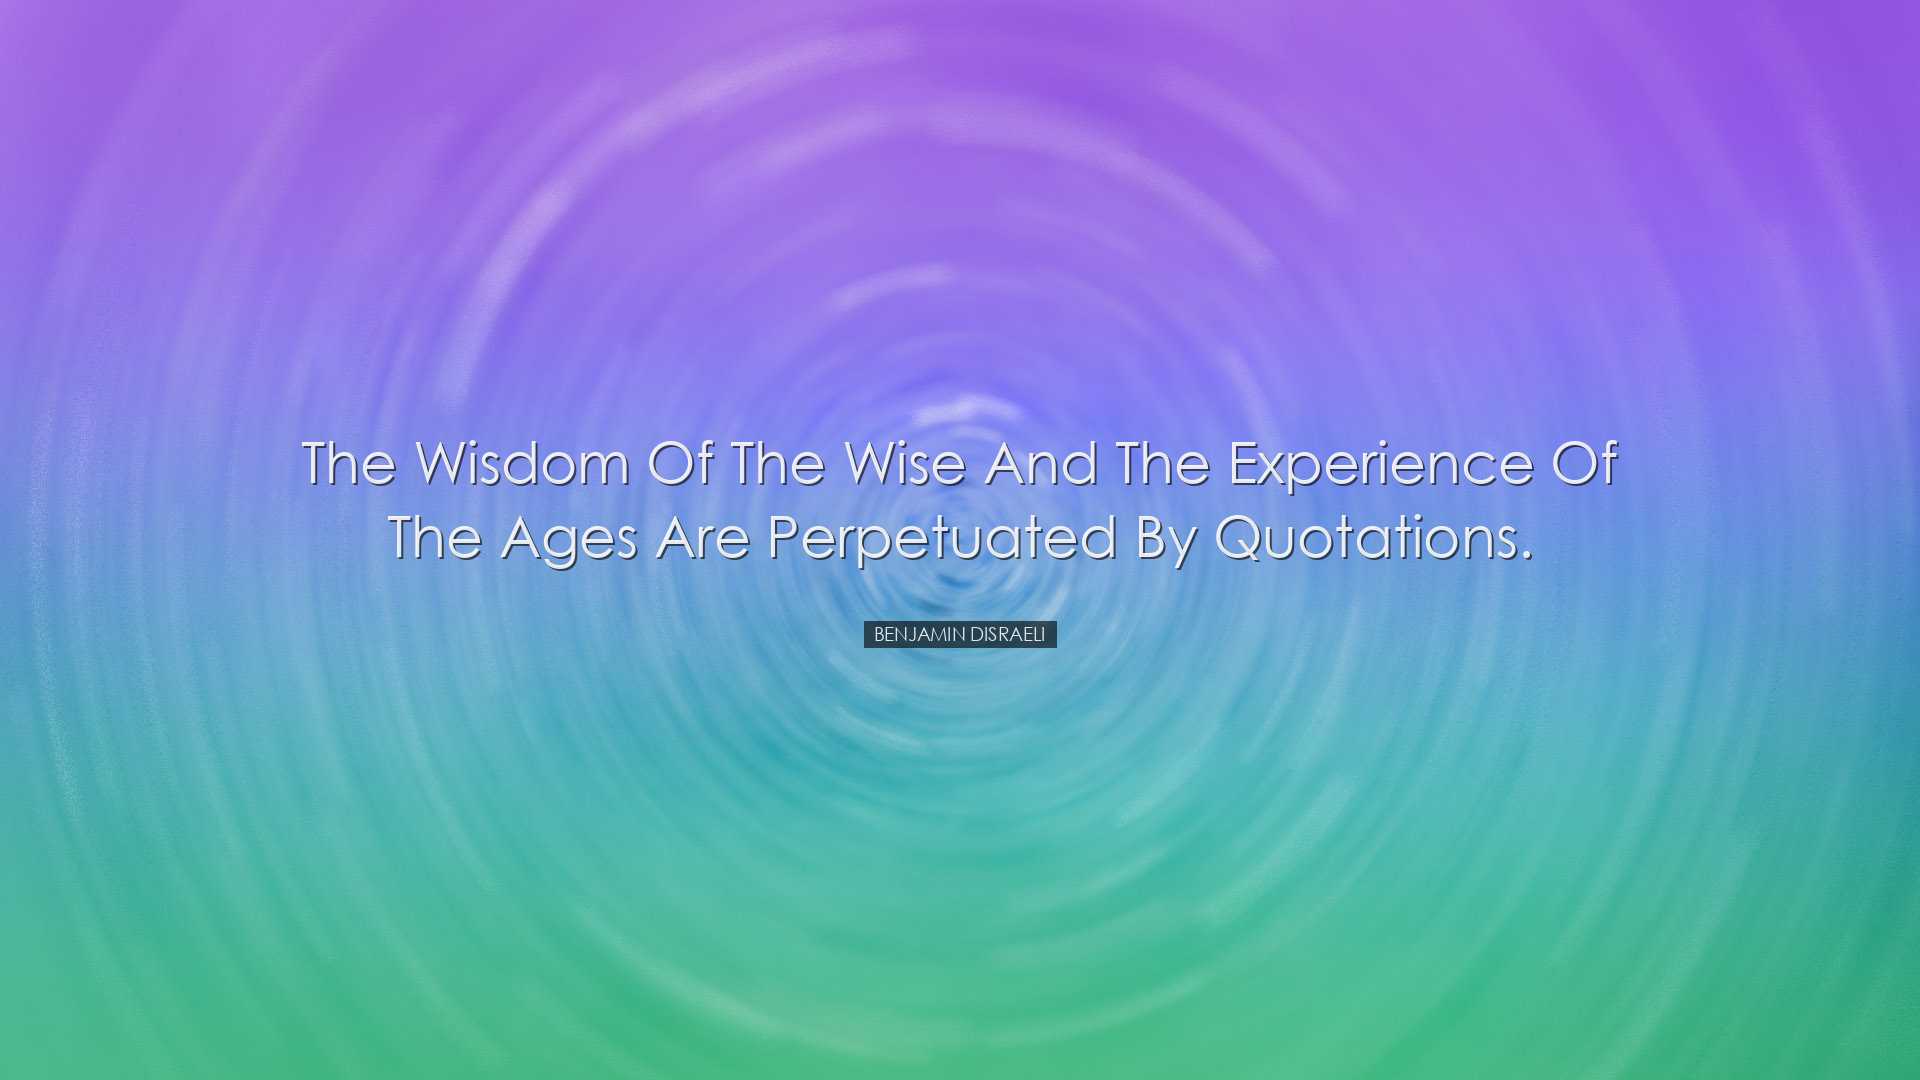 The wisdom of the wise and the experience of the ages are perpetua